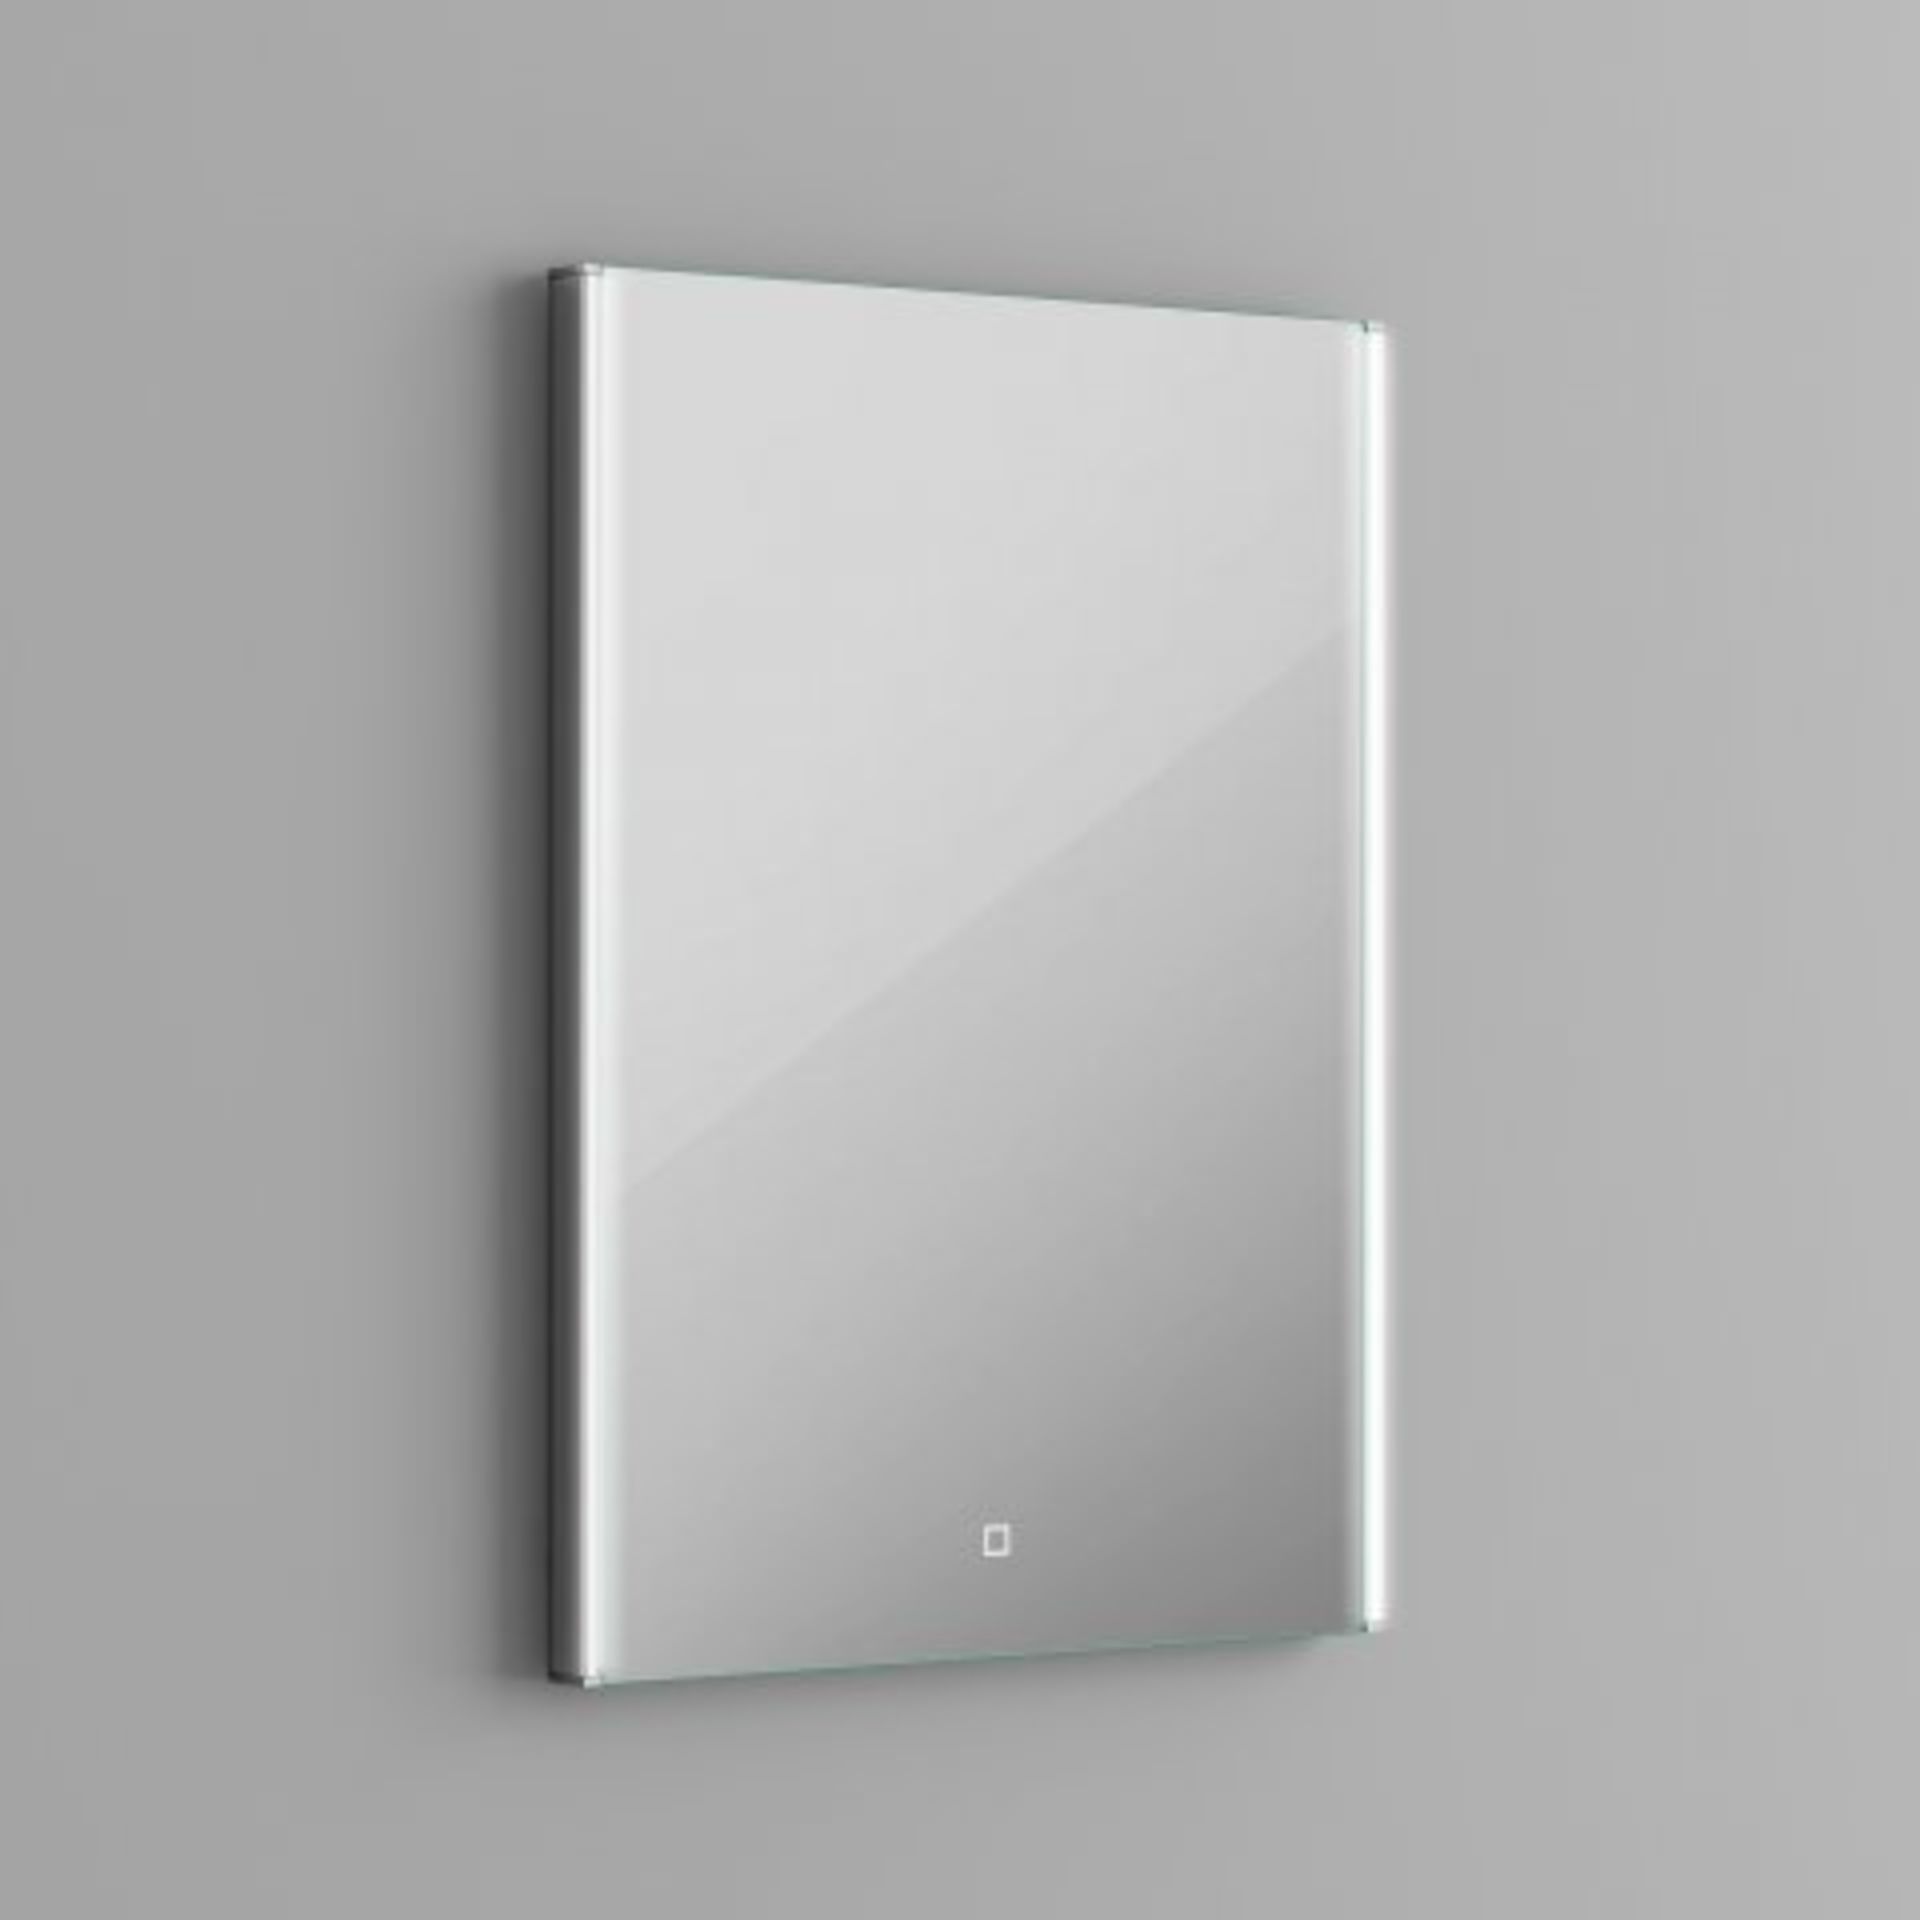 (P165) 700x500mm Lunar Illuminated LED Mirror - Switch Control. RRP £349.99. Our Lunar range of - Image 5 of 5